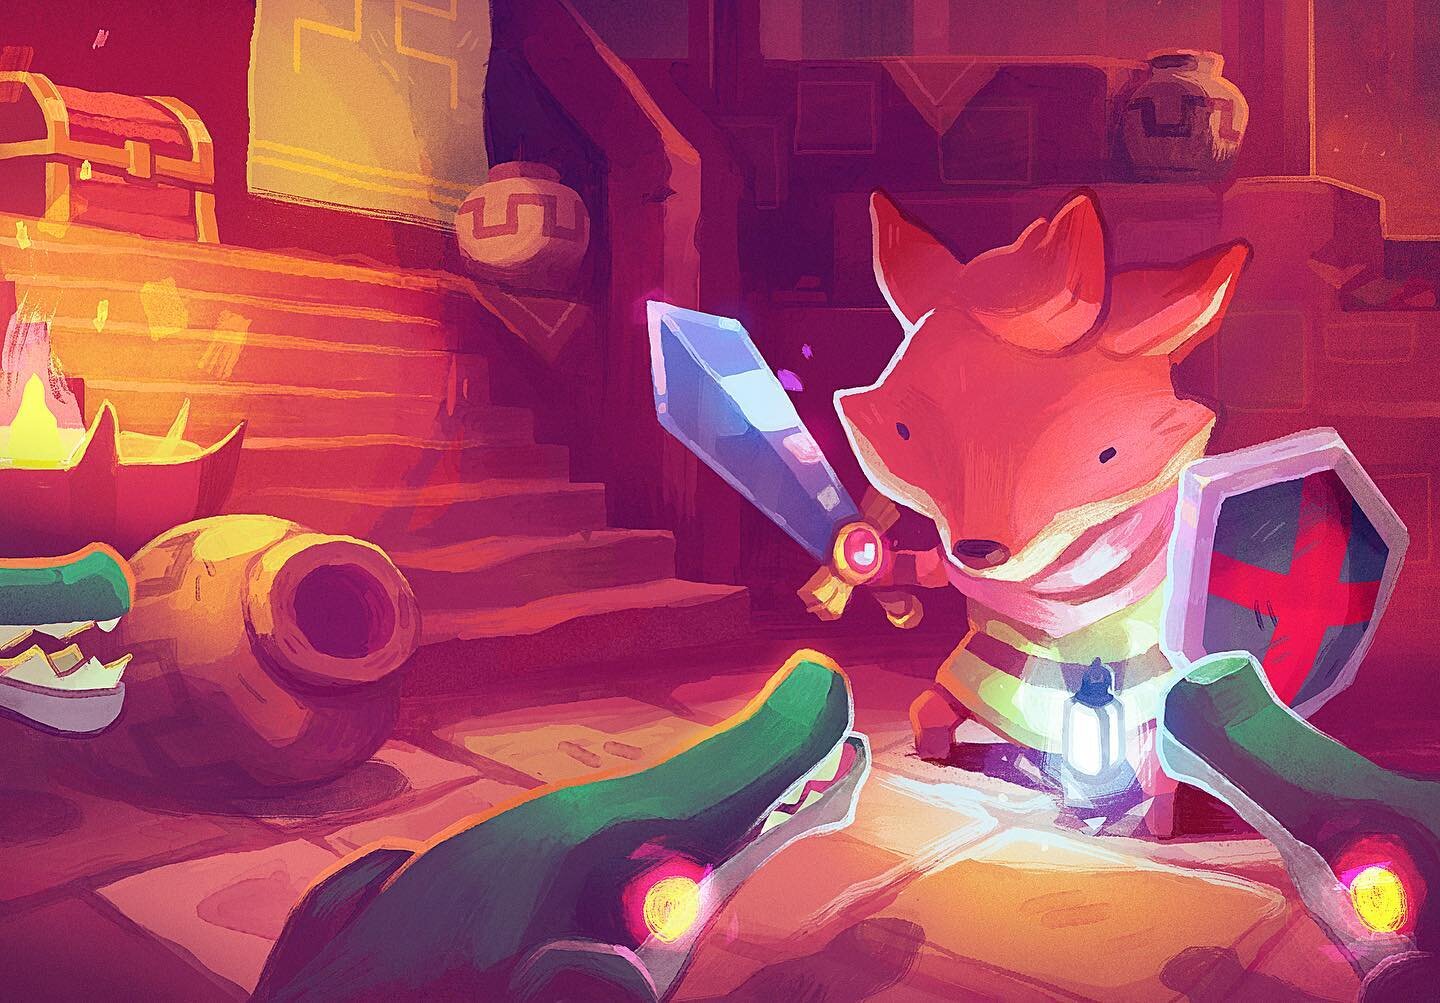 For the TUNIC fans, here&rsquo;s an illustration I did this year for @finjico and @gamestribune 🦊⚔️

It&rsquo;s my first ever magazine cover illustration. My younger self would have been very proud 🥲

#tunic #videogames #illustration